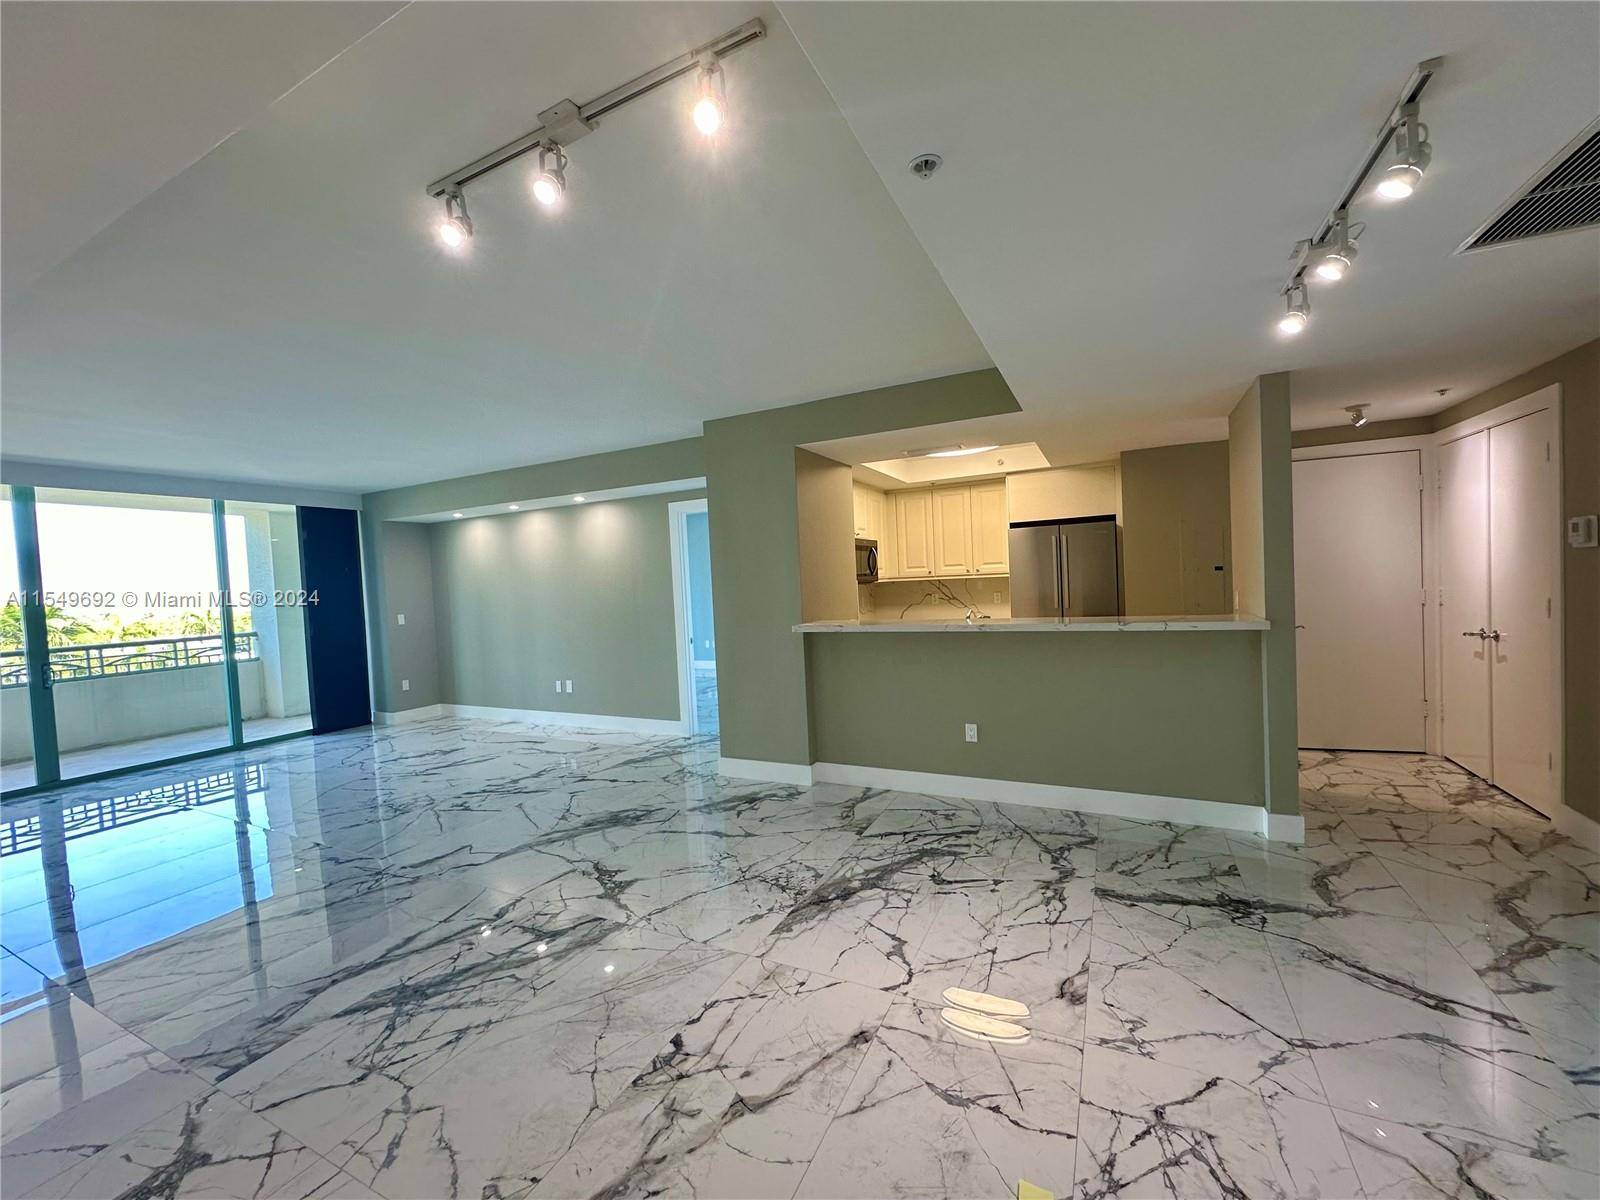 Brand new, completely renovated, rarely available 2 bedroom 2 and a half bath Ritz Carlton Tower Residences home.